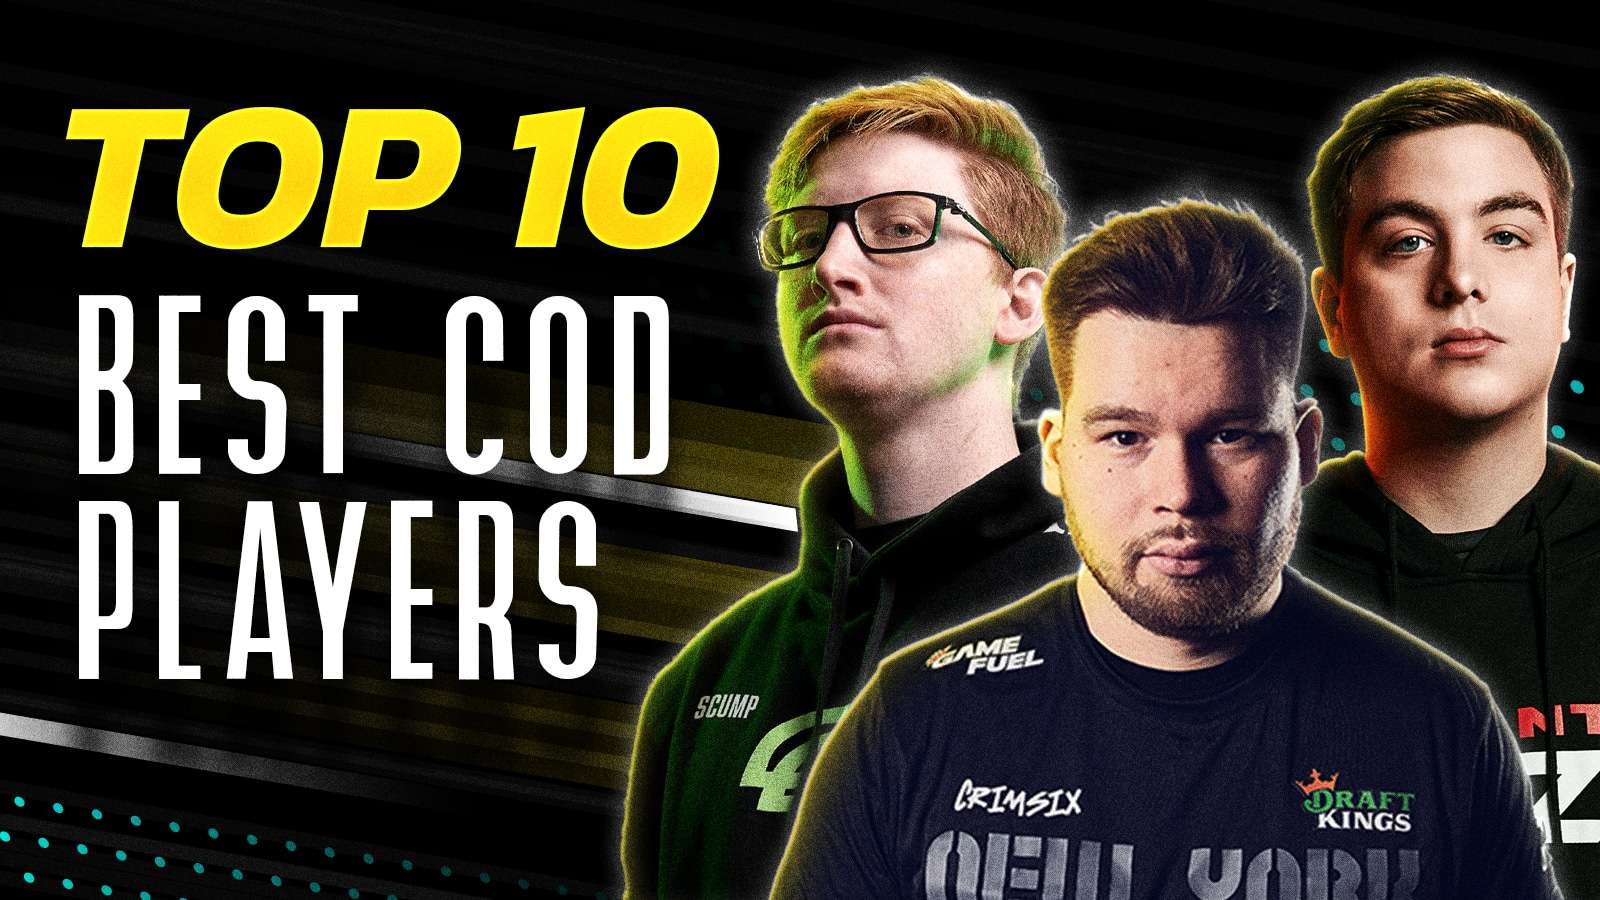 top 10 best cod players with scump crimsix and simp